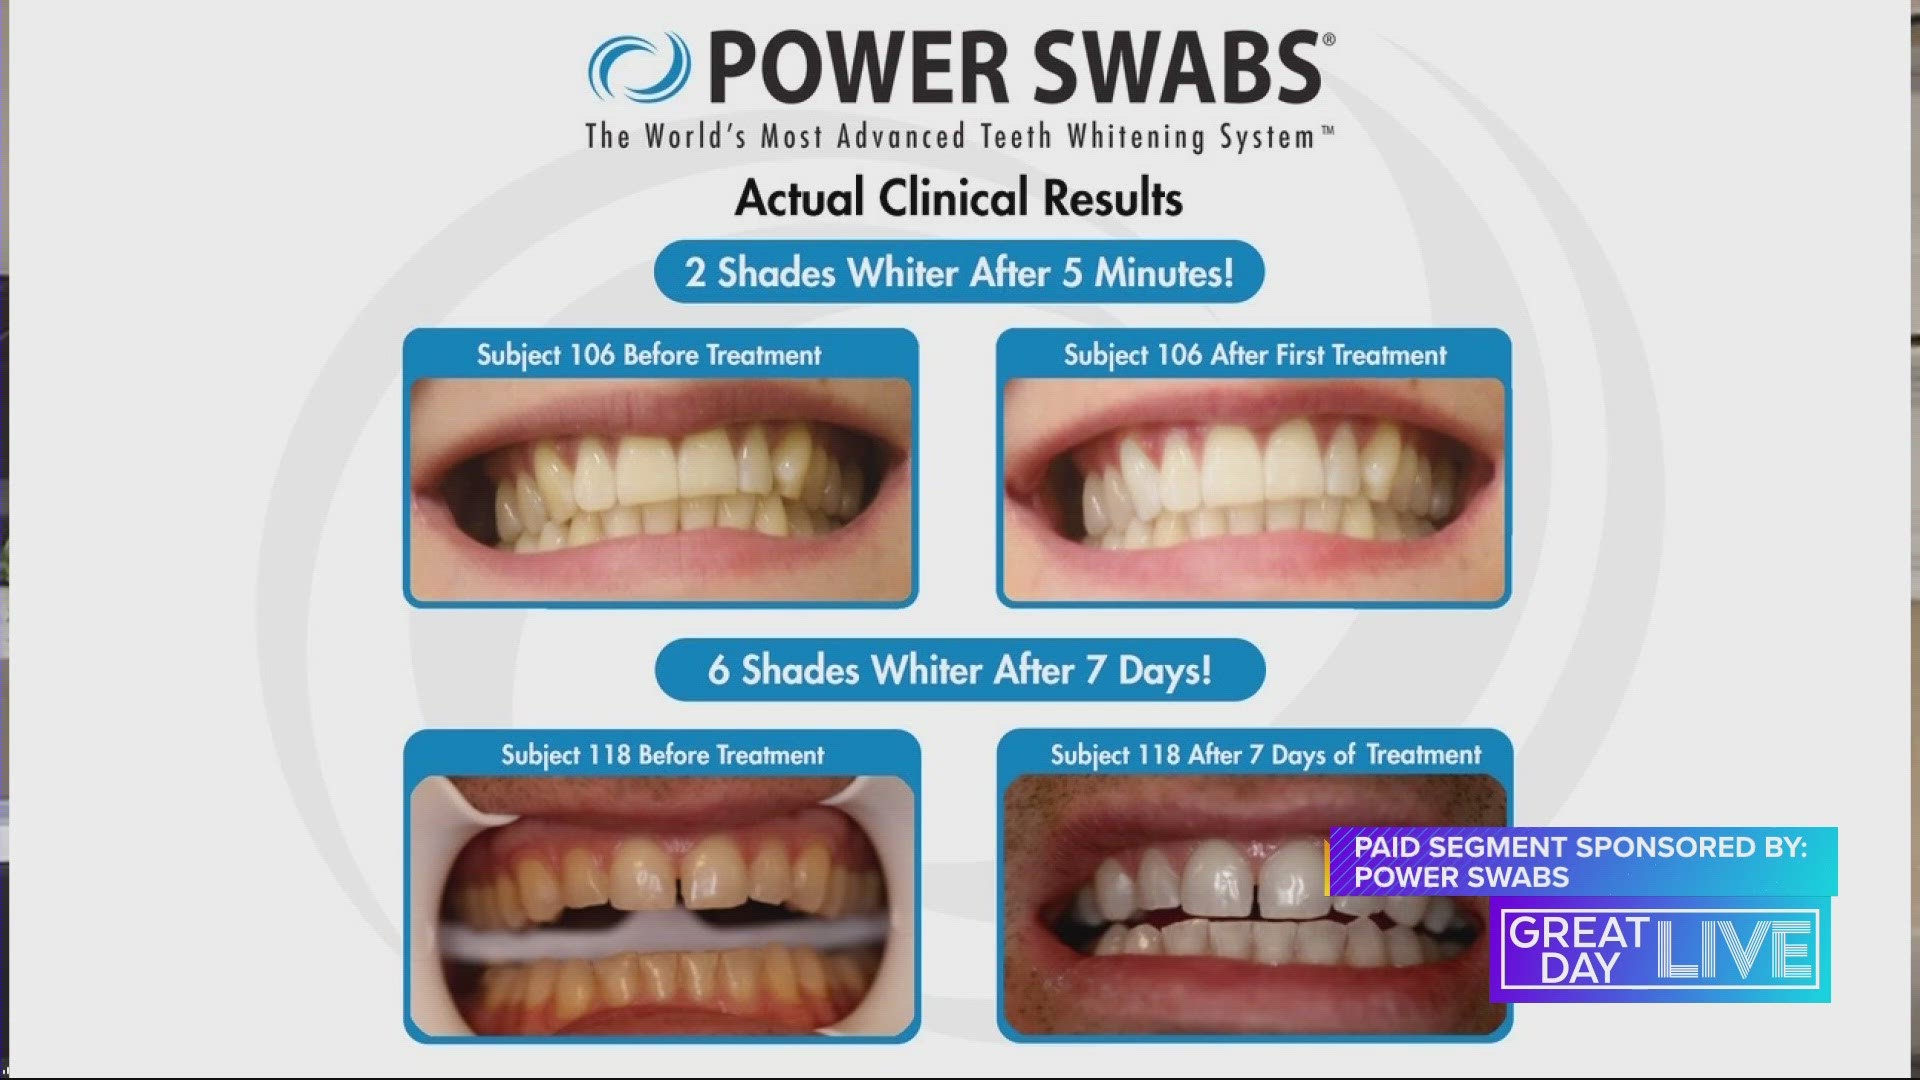 Power Swabs can whiten your teeth without painful sensitivity and right from your home. Get this Memorial day special with 50% off if you call 800-934-7642.